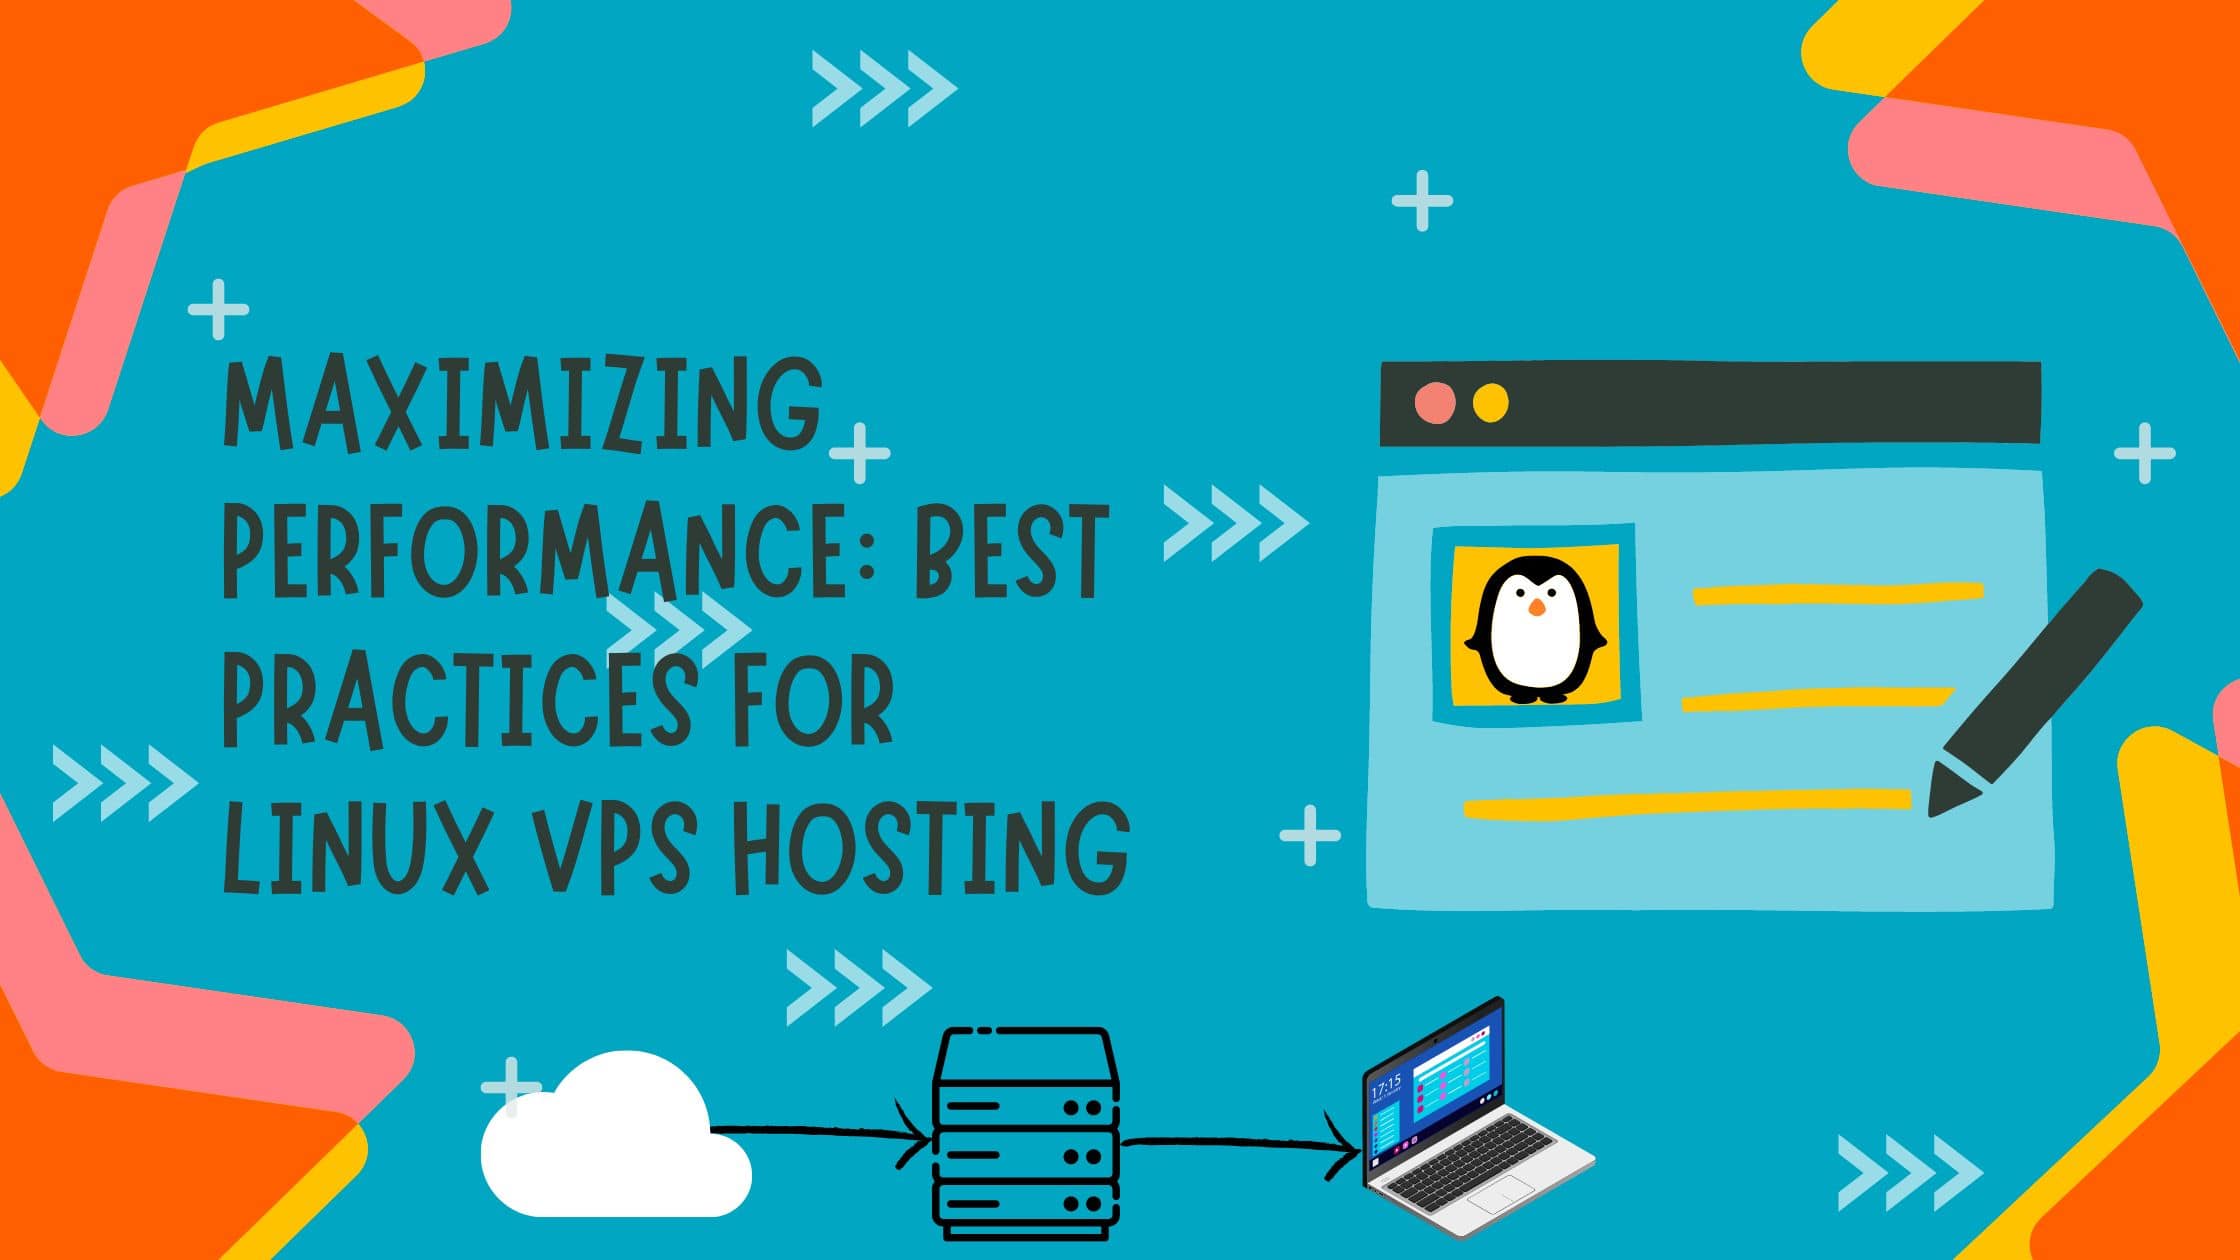 Maximizing performance: Best practices for Linux VPS hosting